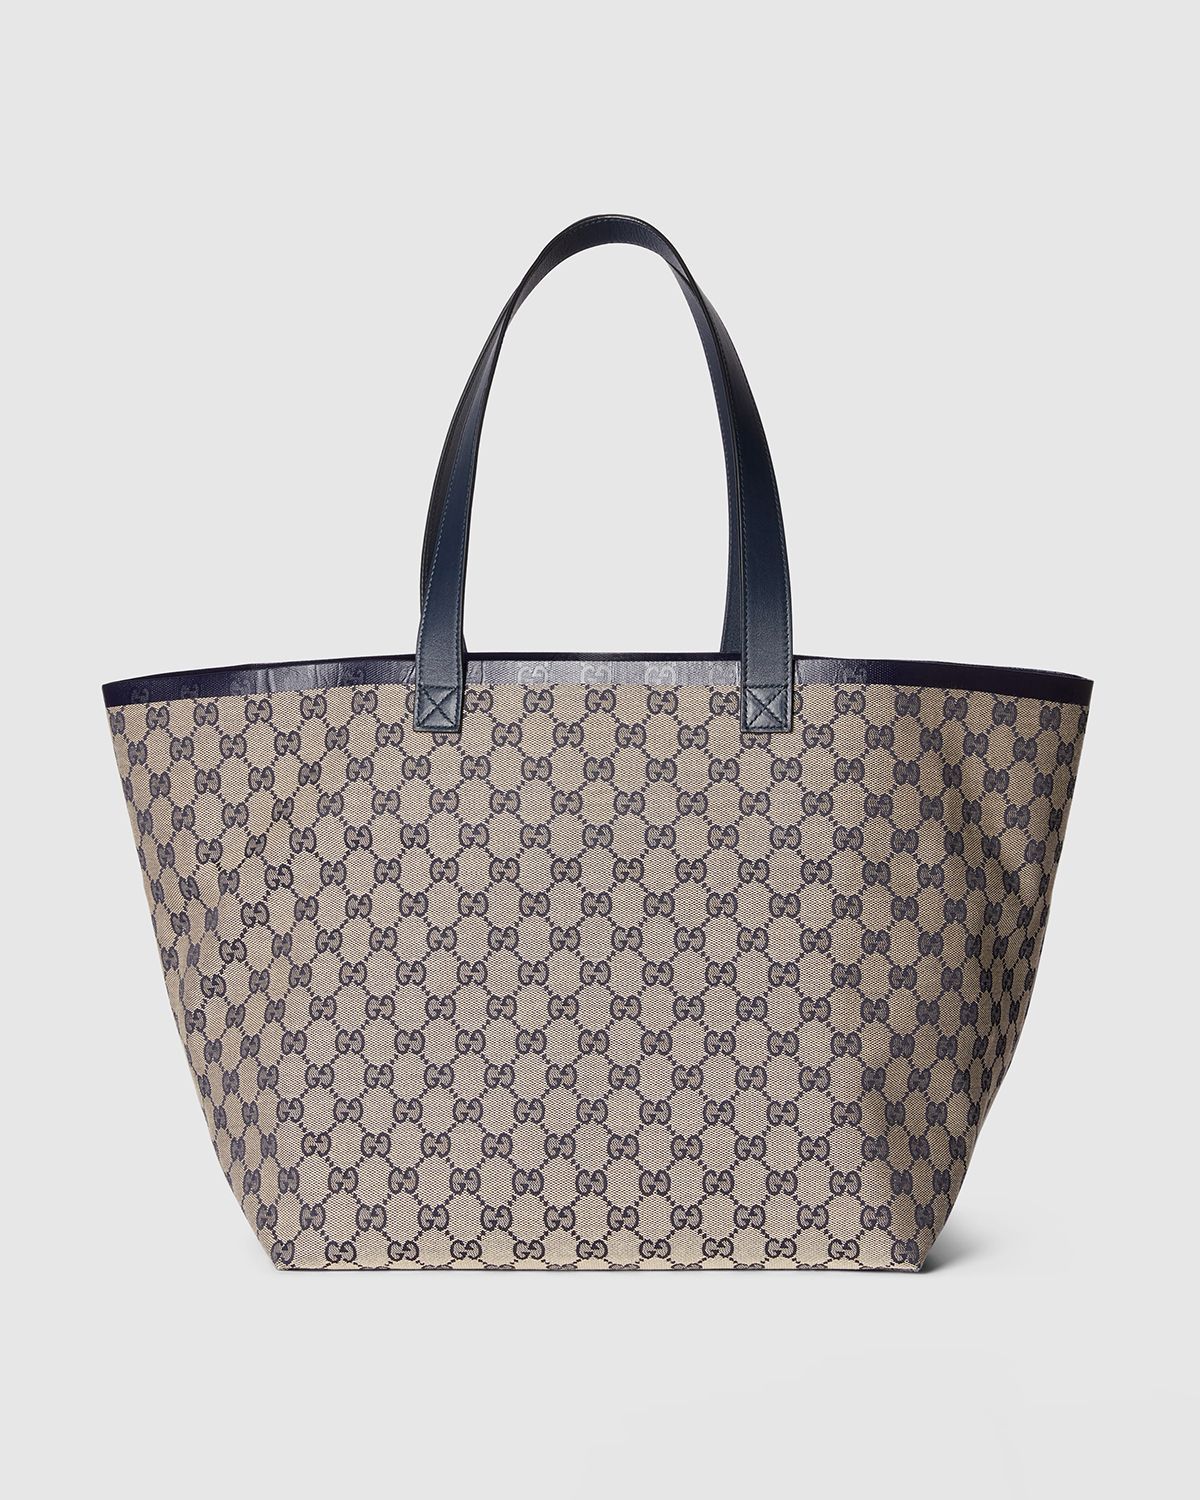 <p><strong>$2490.00</strong></p><p><a href="https://go.redirectingat.com?id=74968X1553576&url=https%3A%2F%2Fwww.gucci.com%2Fus%2Fen%2Fpr%2Fwomen%2Fhandbags%2Fshoulder-bags-for-women%2Foriginal-gg-medium-tote-bag-p-788203FADH34052&sref=https%3A%2F%2Fwww.elle.com%2Ffashion%2Fg45233529%2Fbest-designer-tote-bags%2F">Shop Now</a></p><p>What a way to say, “It’s all Gucci,” right? This medium-sized tote is perfect for the longer days when you need to carry a bit more than the essentials with you, be it a book, a mini fan, headphones, or something else entirely. </p><p><strong>Material:</strong> Canvas; leather trim</p><p><strong>Colors:</strong> Beige and Blue</p><p><strong>Dimensions: </strong>Height: 11 inches; width: 11.8 inches; depth: 10.2 inches</p>